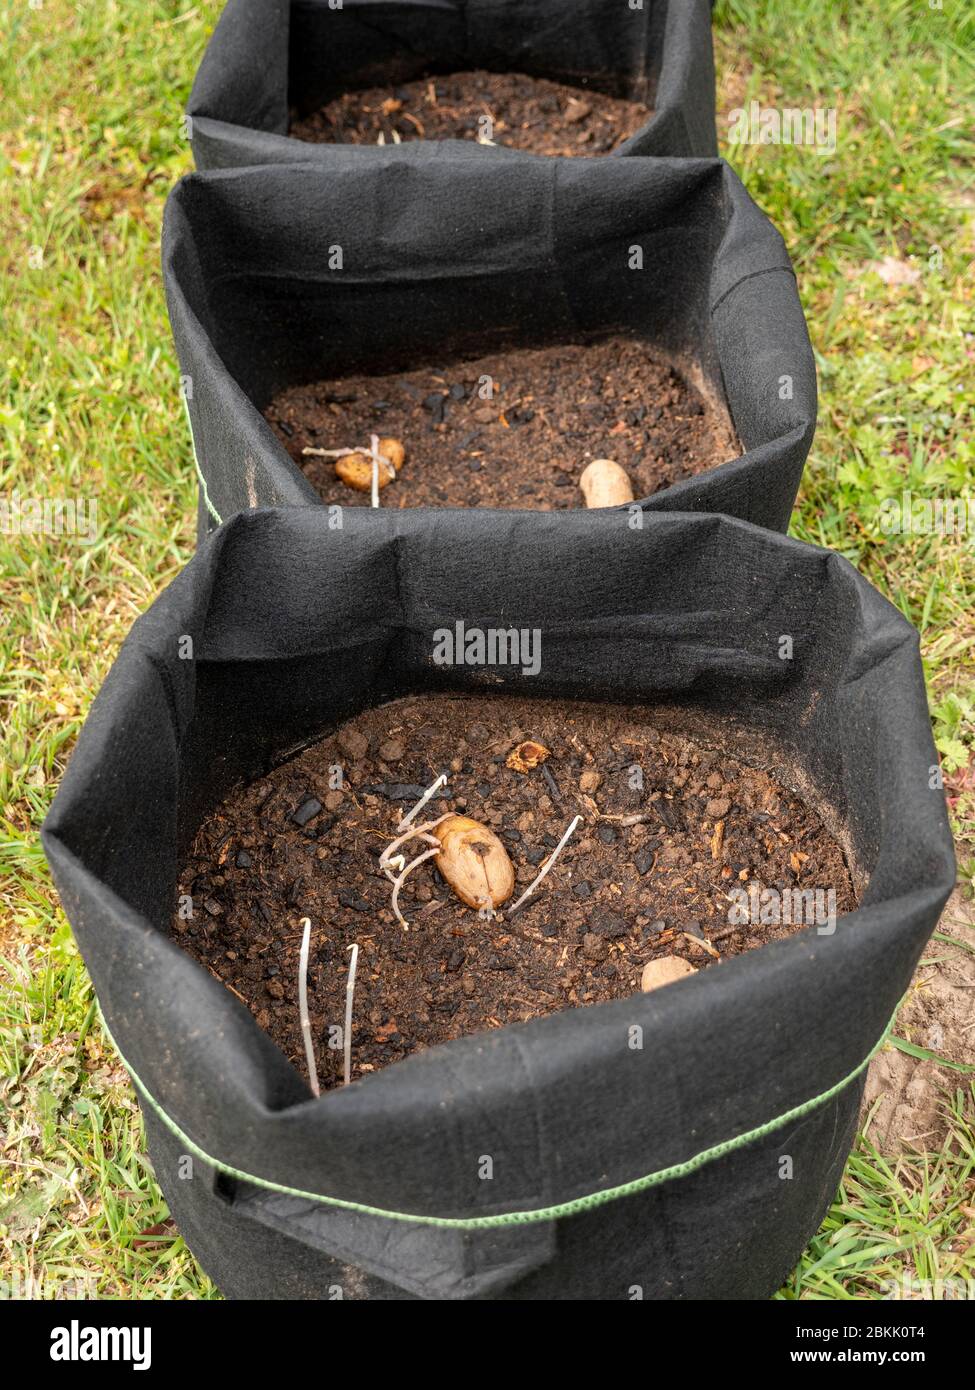 Potatoes planted in a grow bag Stock Photo